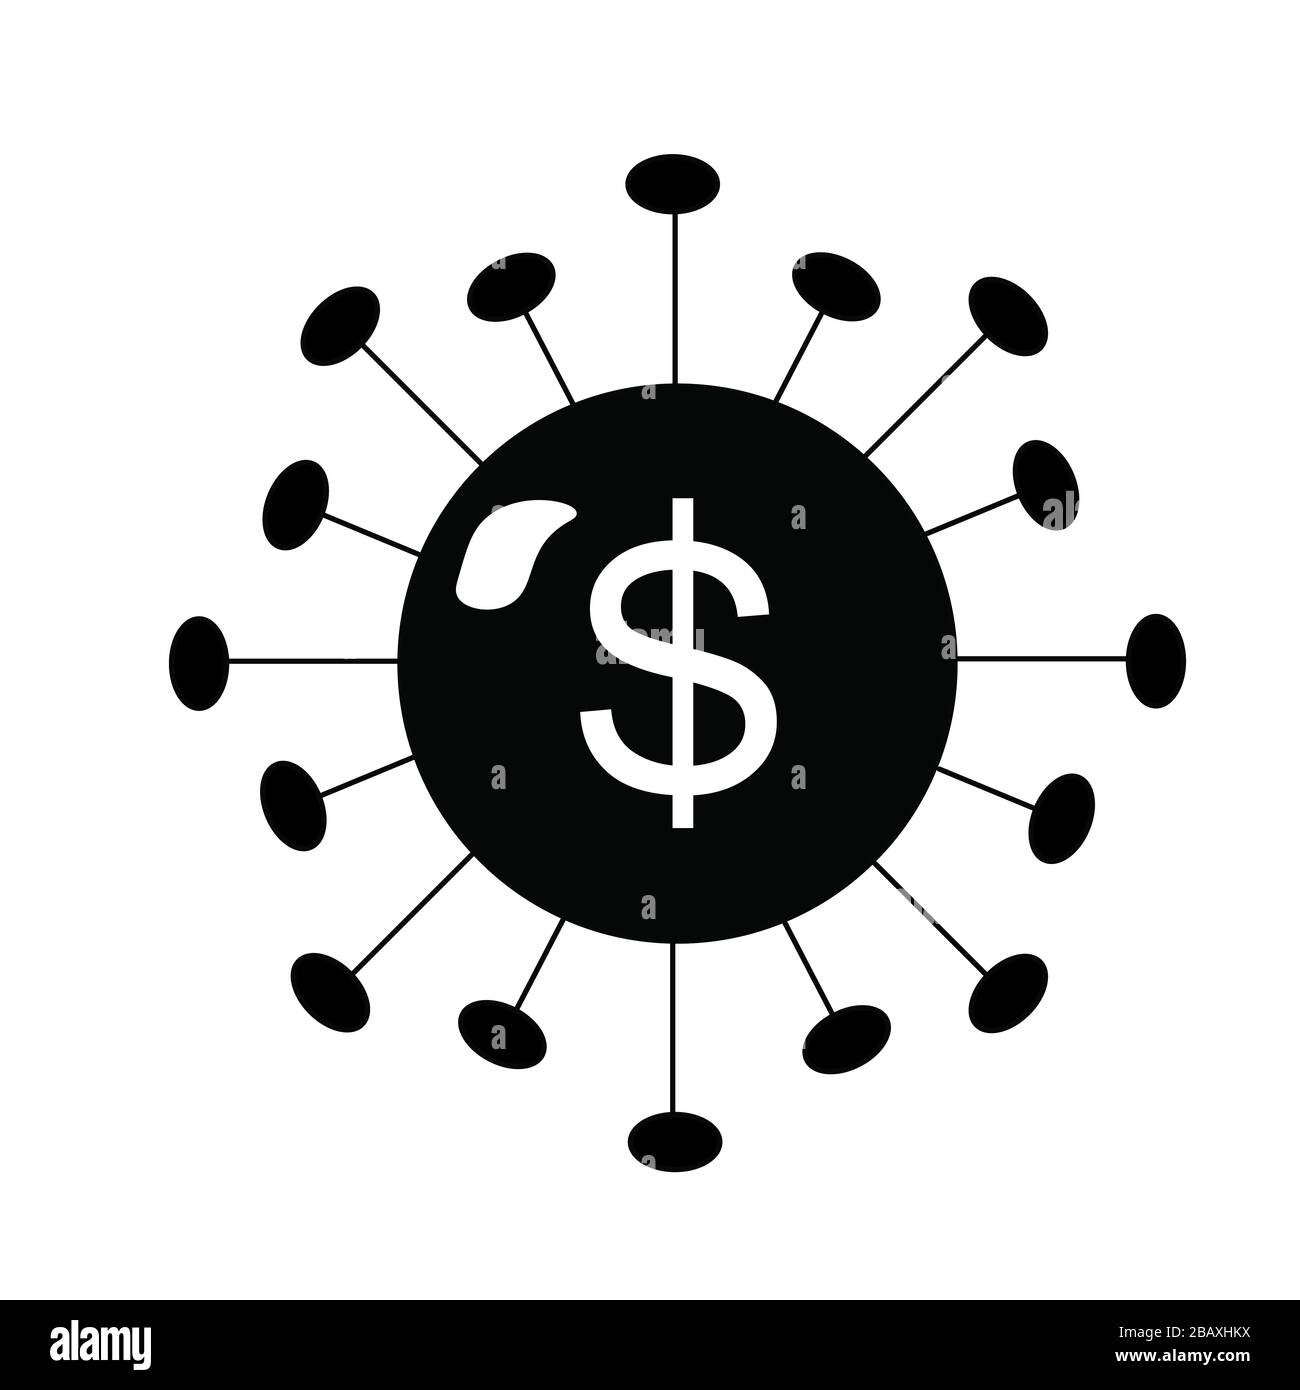 Coronavirus shape with dollar sign in the center. Concept illustration for finance and economic during global pandemic. Stock Photo